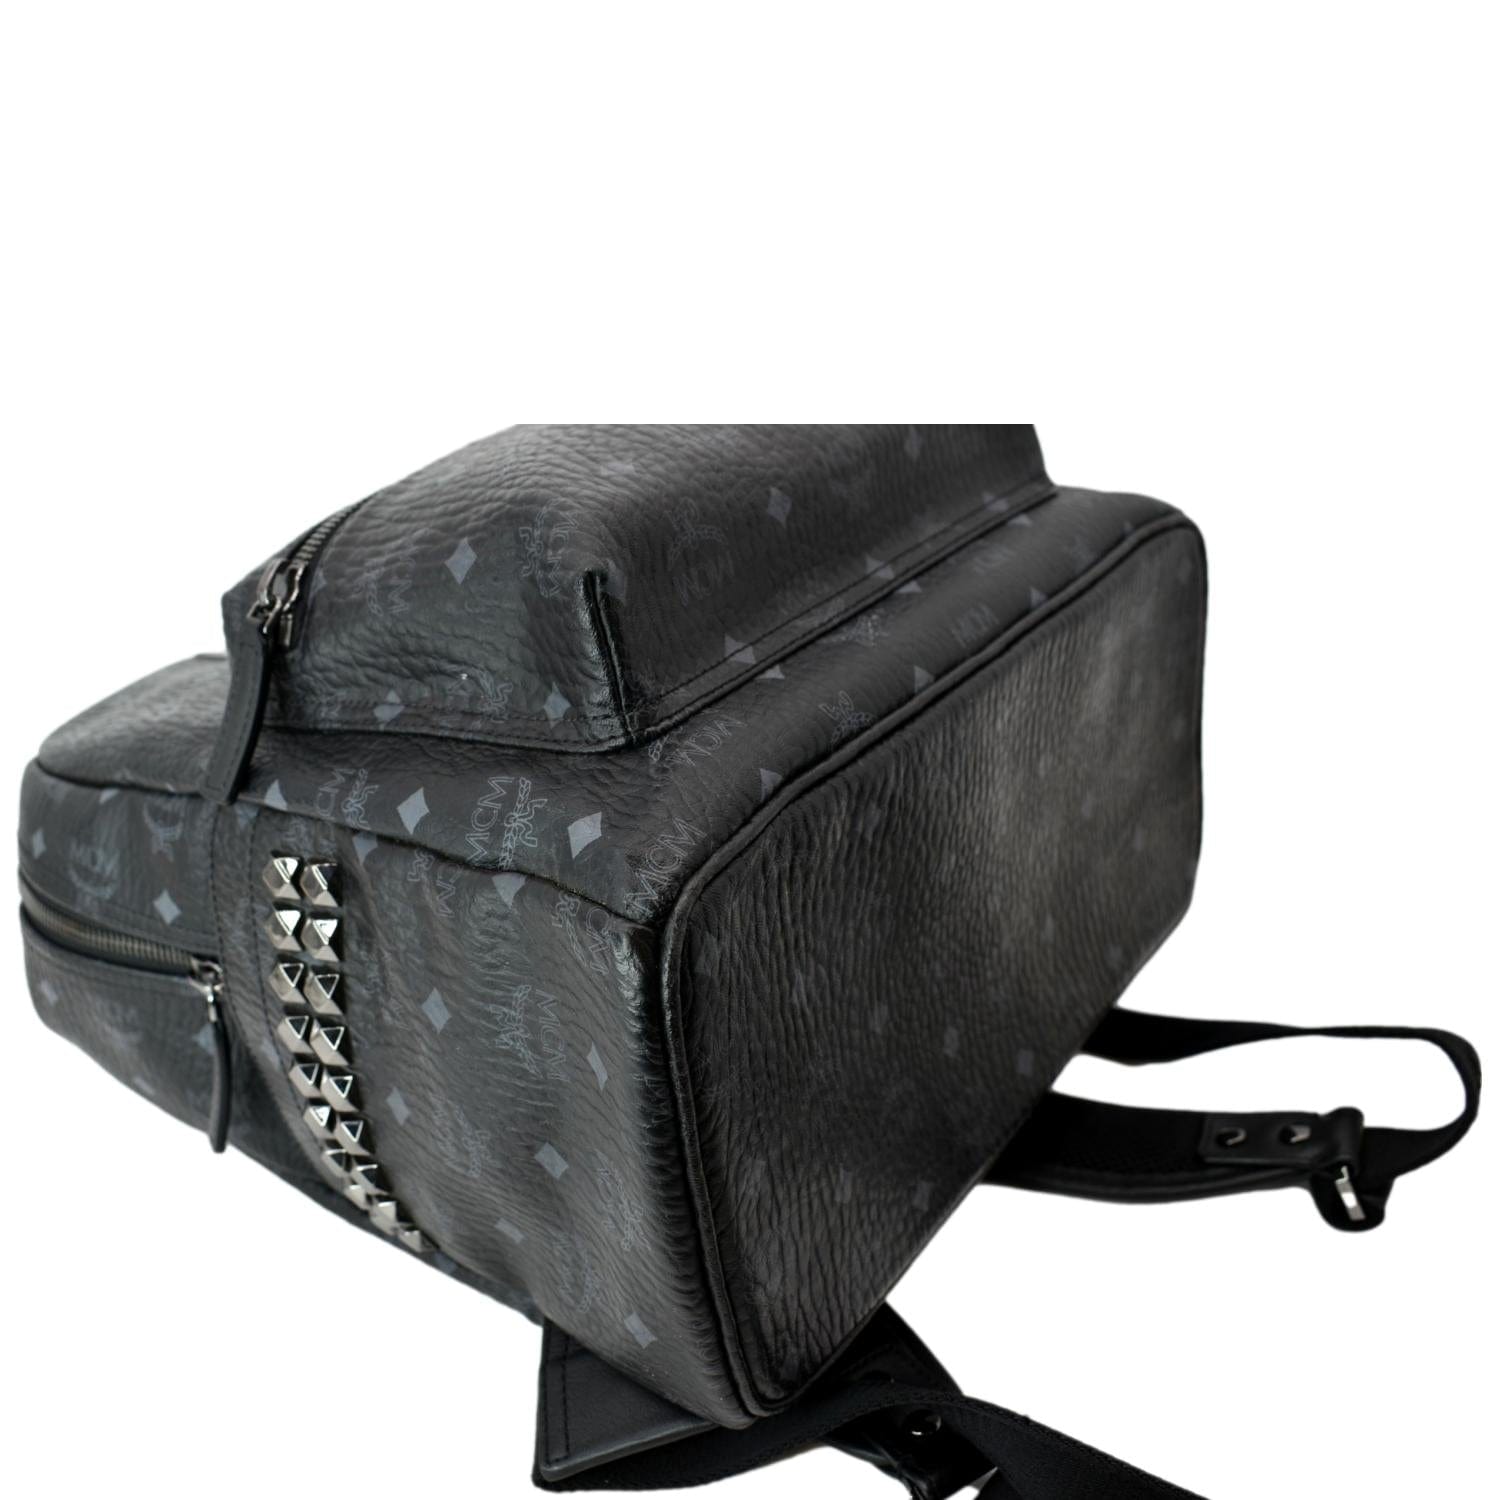 RvceShops Revival, Black MCM Quilted Studded Visetos Leather Backpack